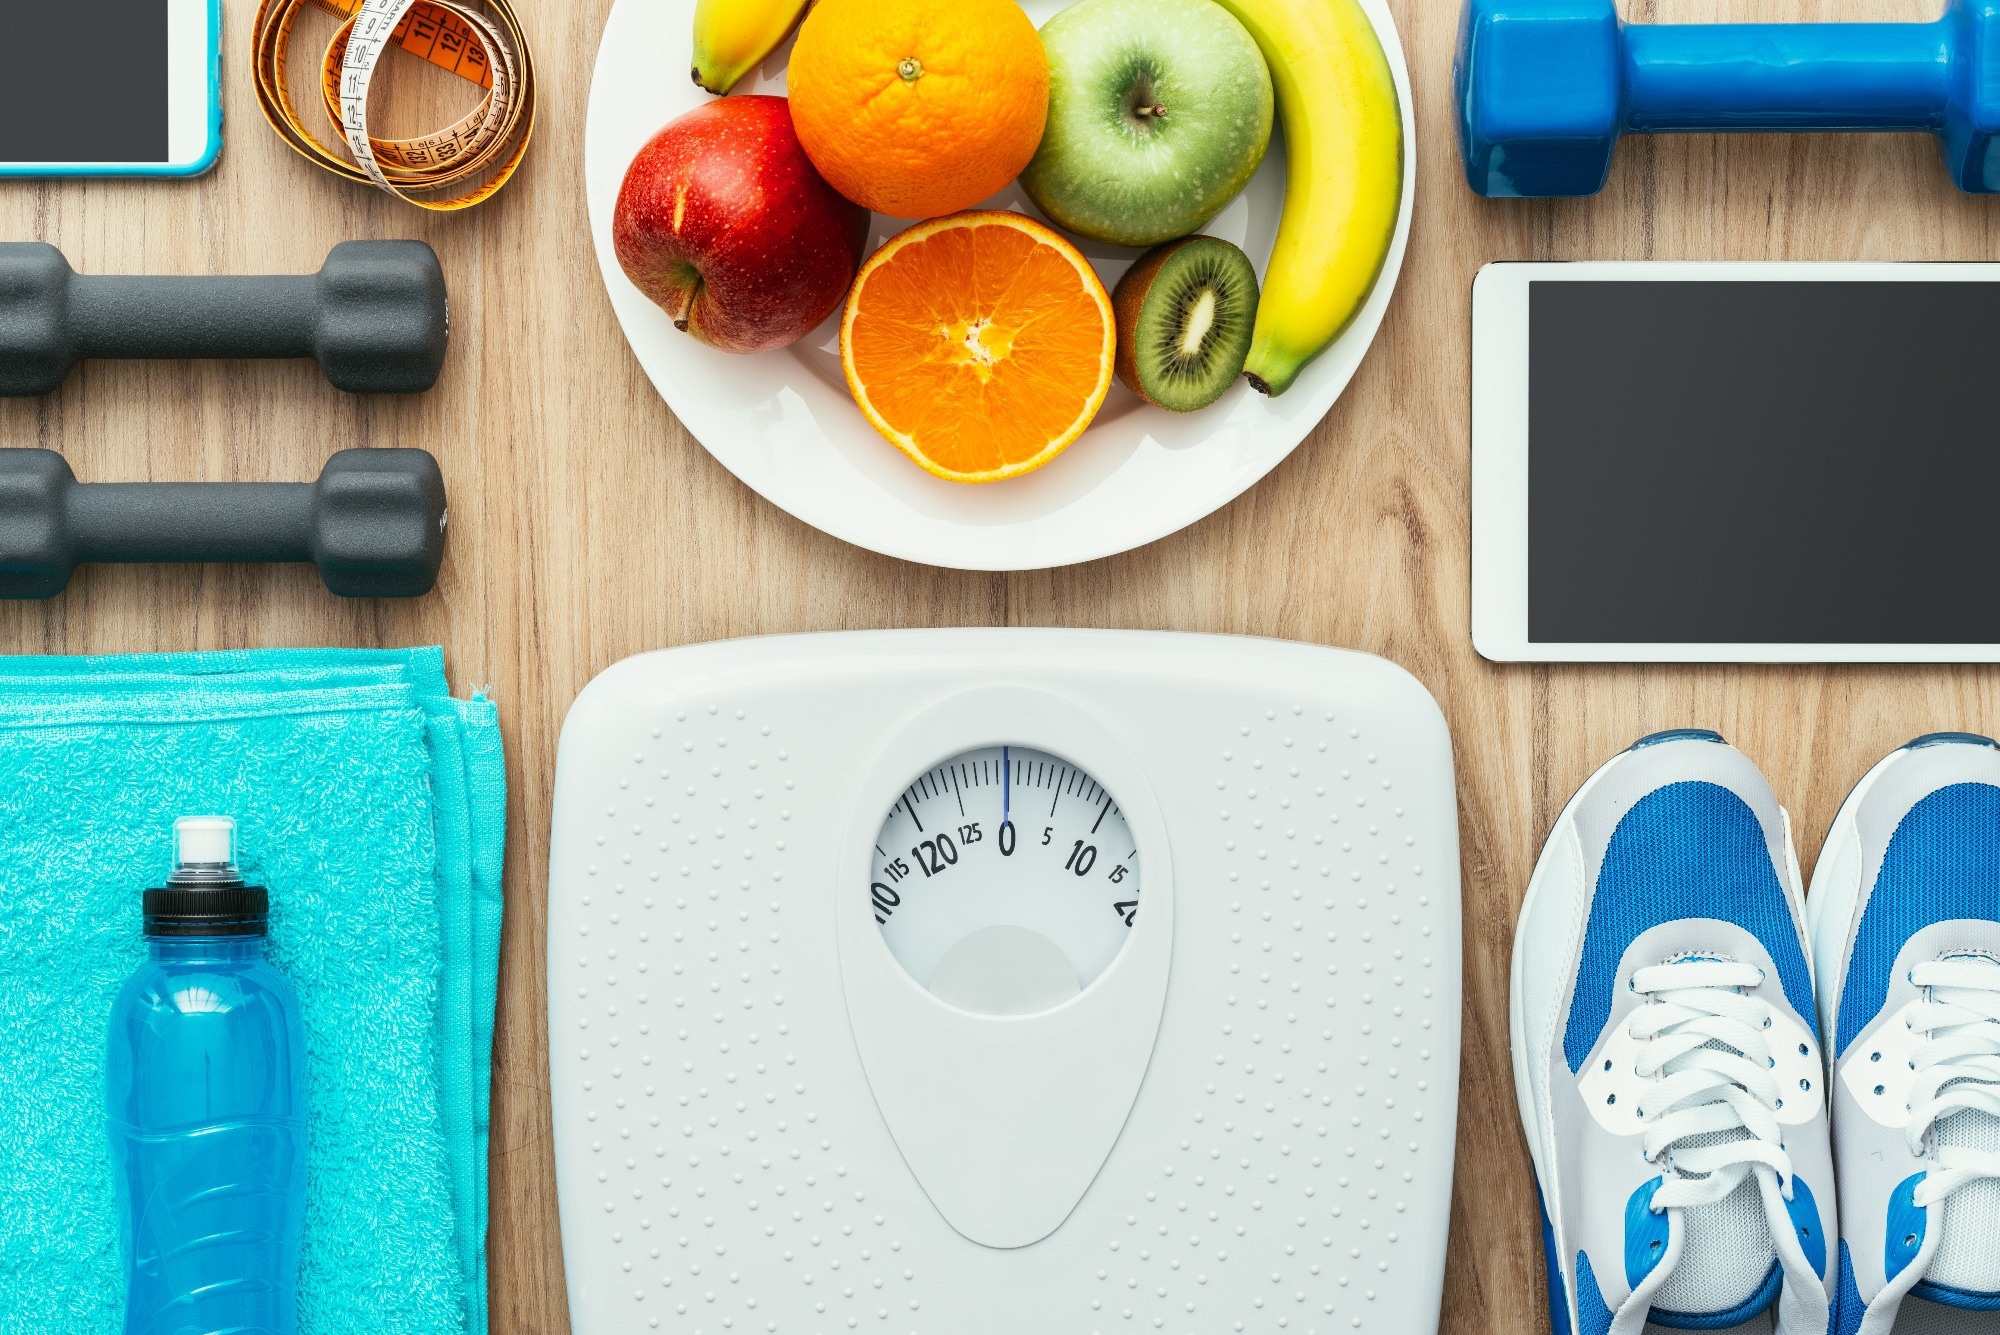 Study: Changes in the prevalence of U.S. adults using diet, exercise, pharmaceuticals and diet products for weight loss over time: Analysis of NHANES 1999–2018. Image Credit: Stock-Asso/Shutterstock.com